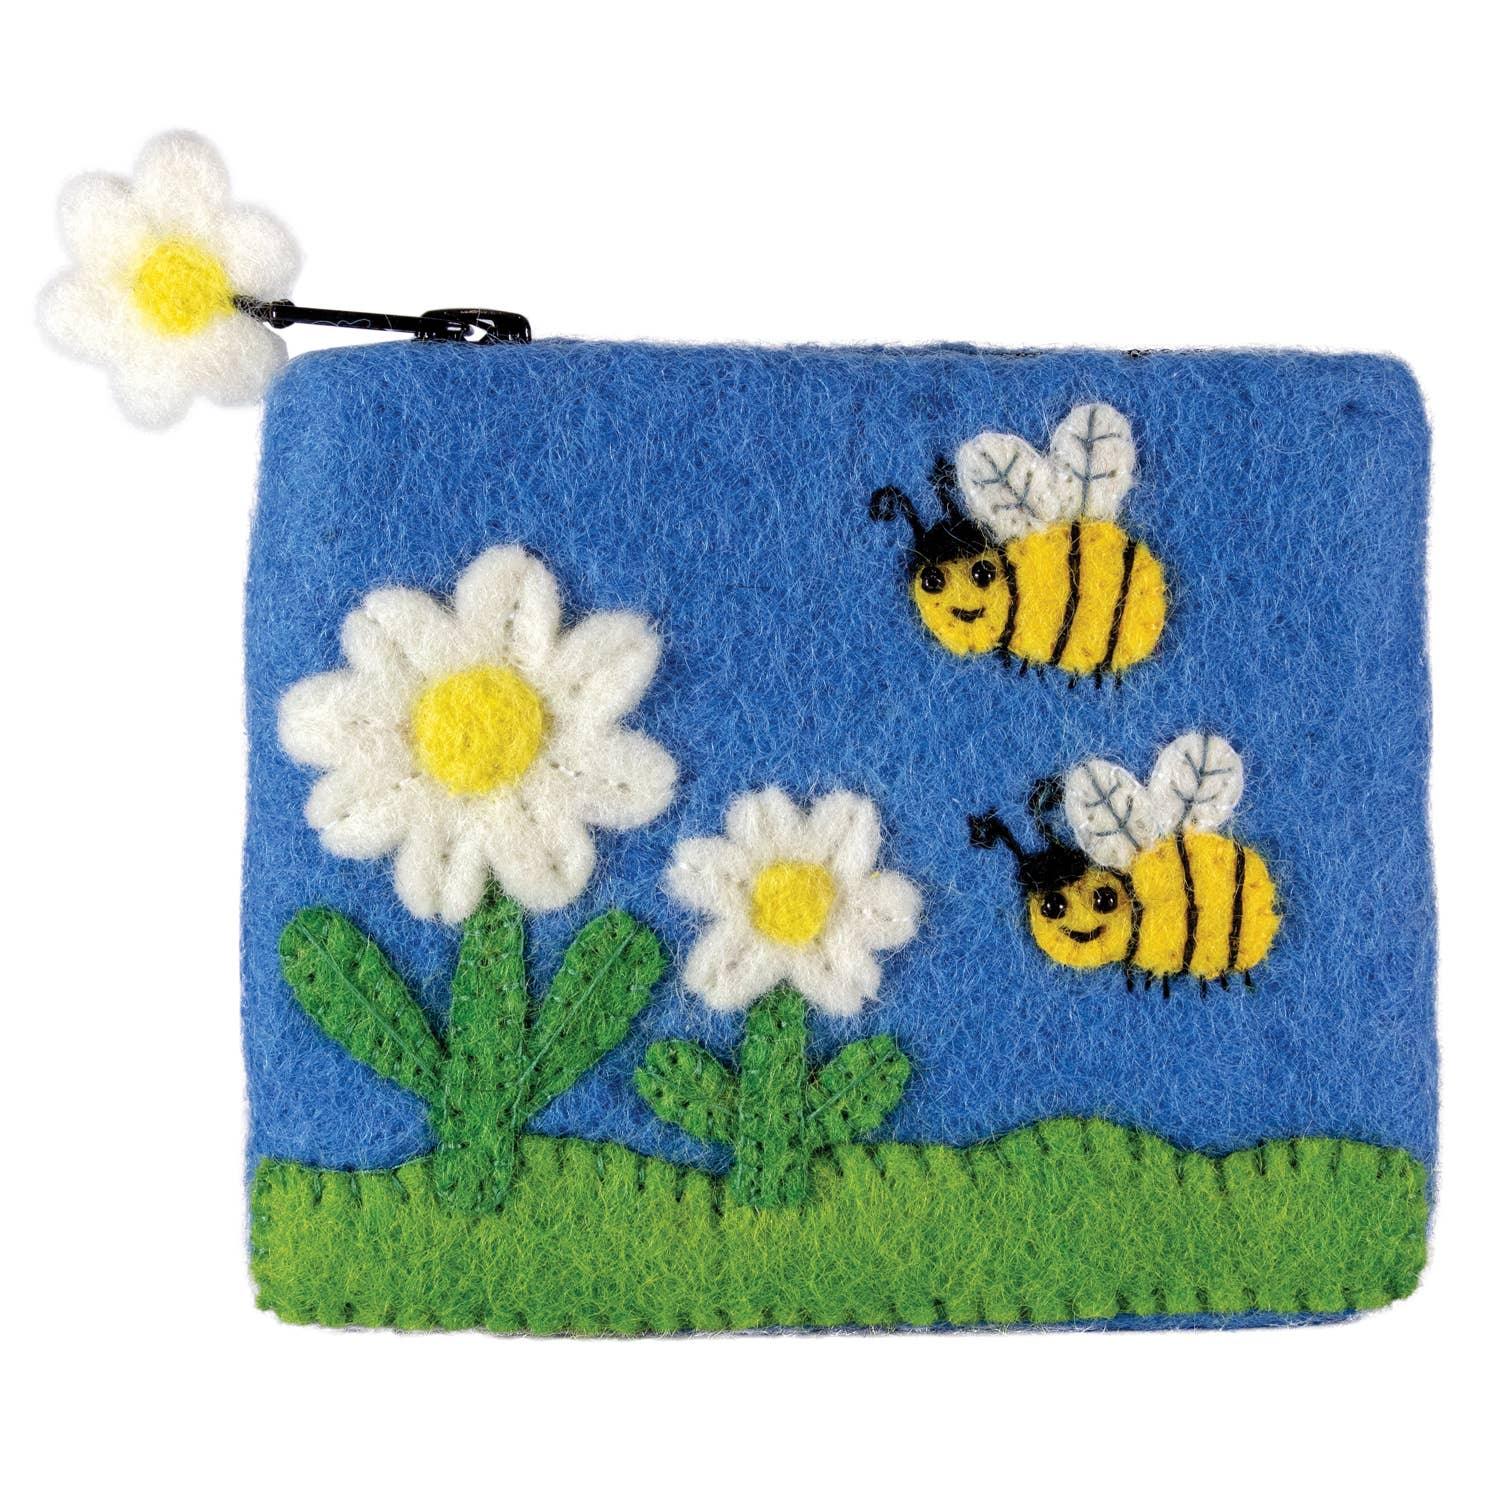 Bumble Bees Coin Purse Uni-T Small Gifts